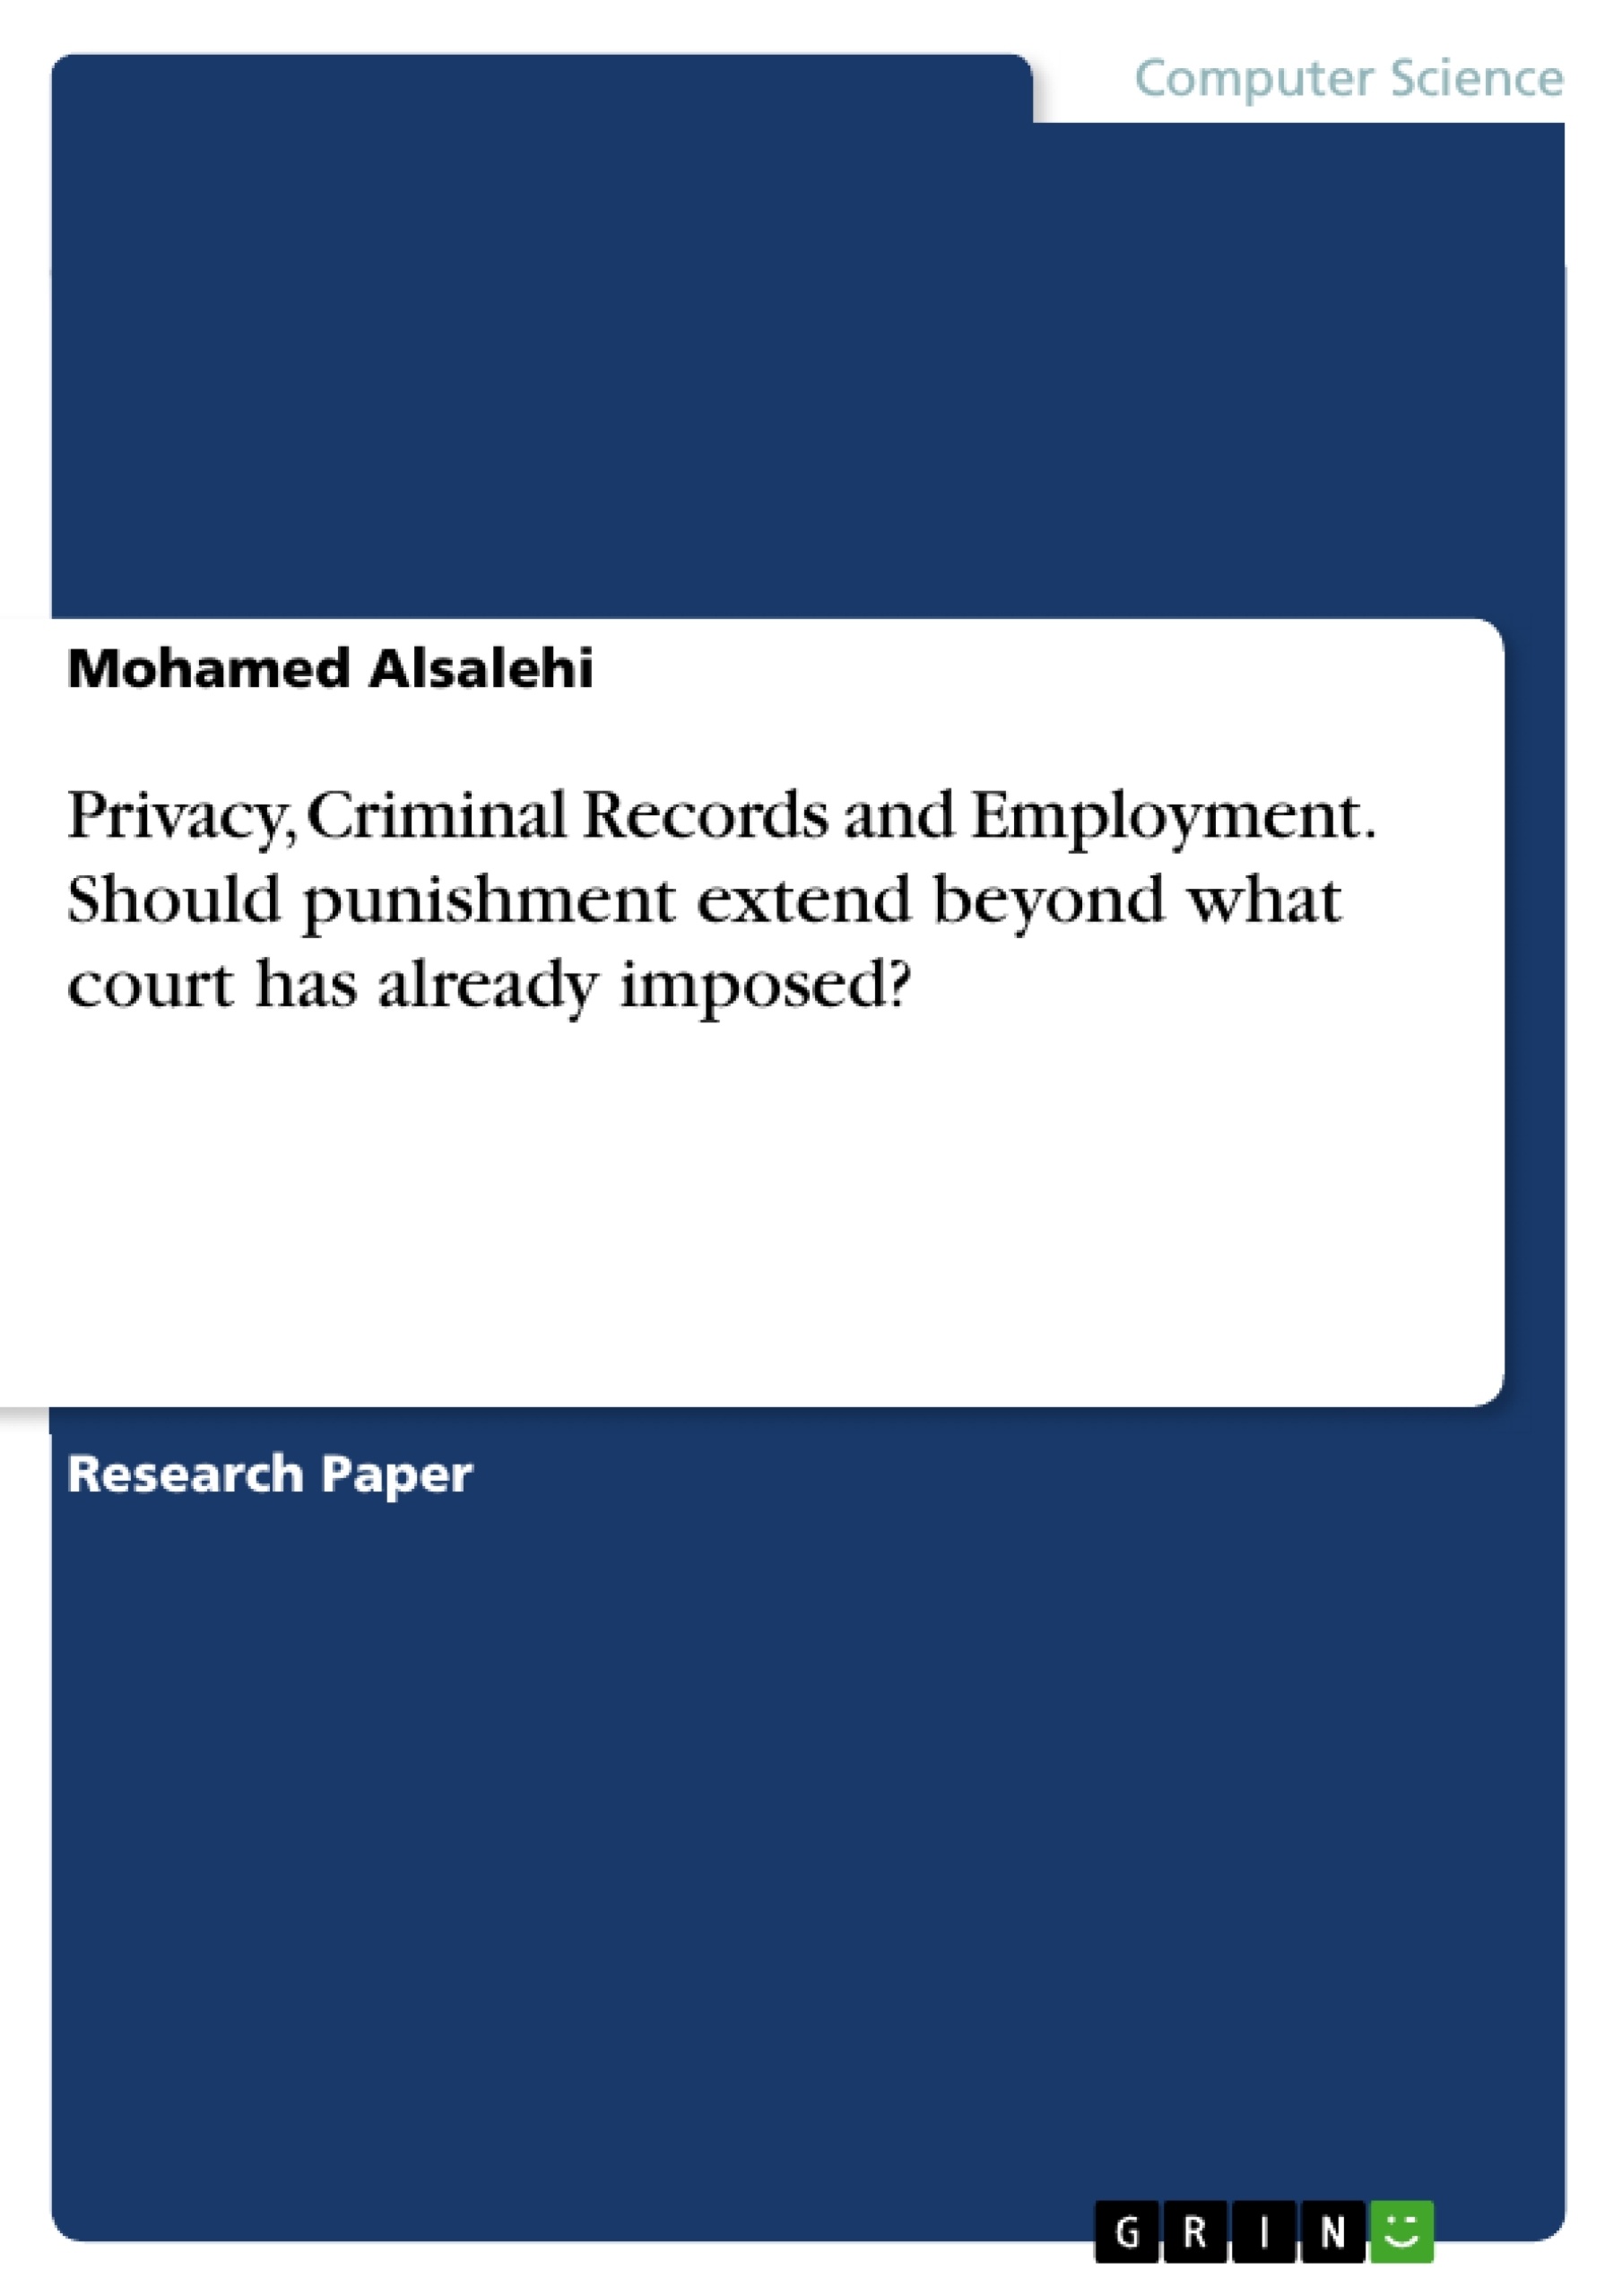 Title: Privacy, Criminal Records and Employment. Should punishment extend beyond what court has already imposed?